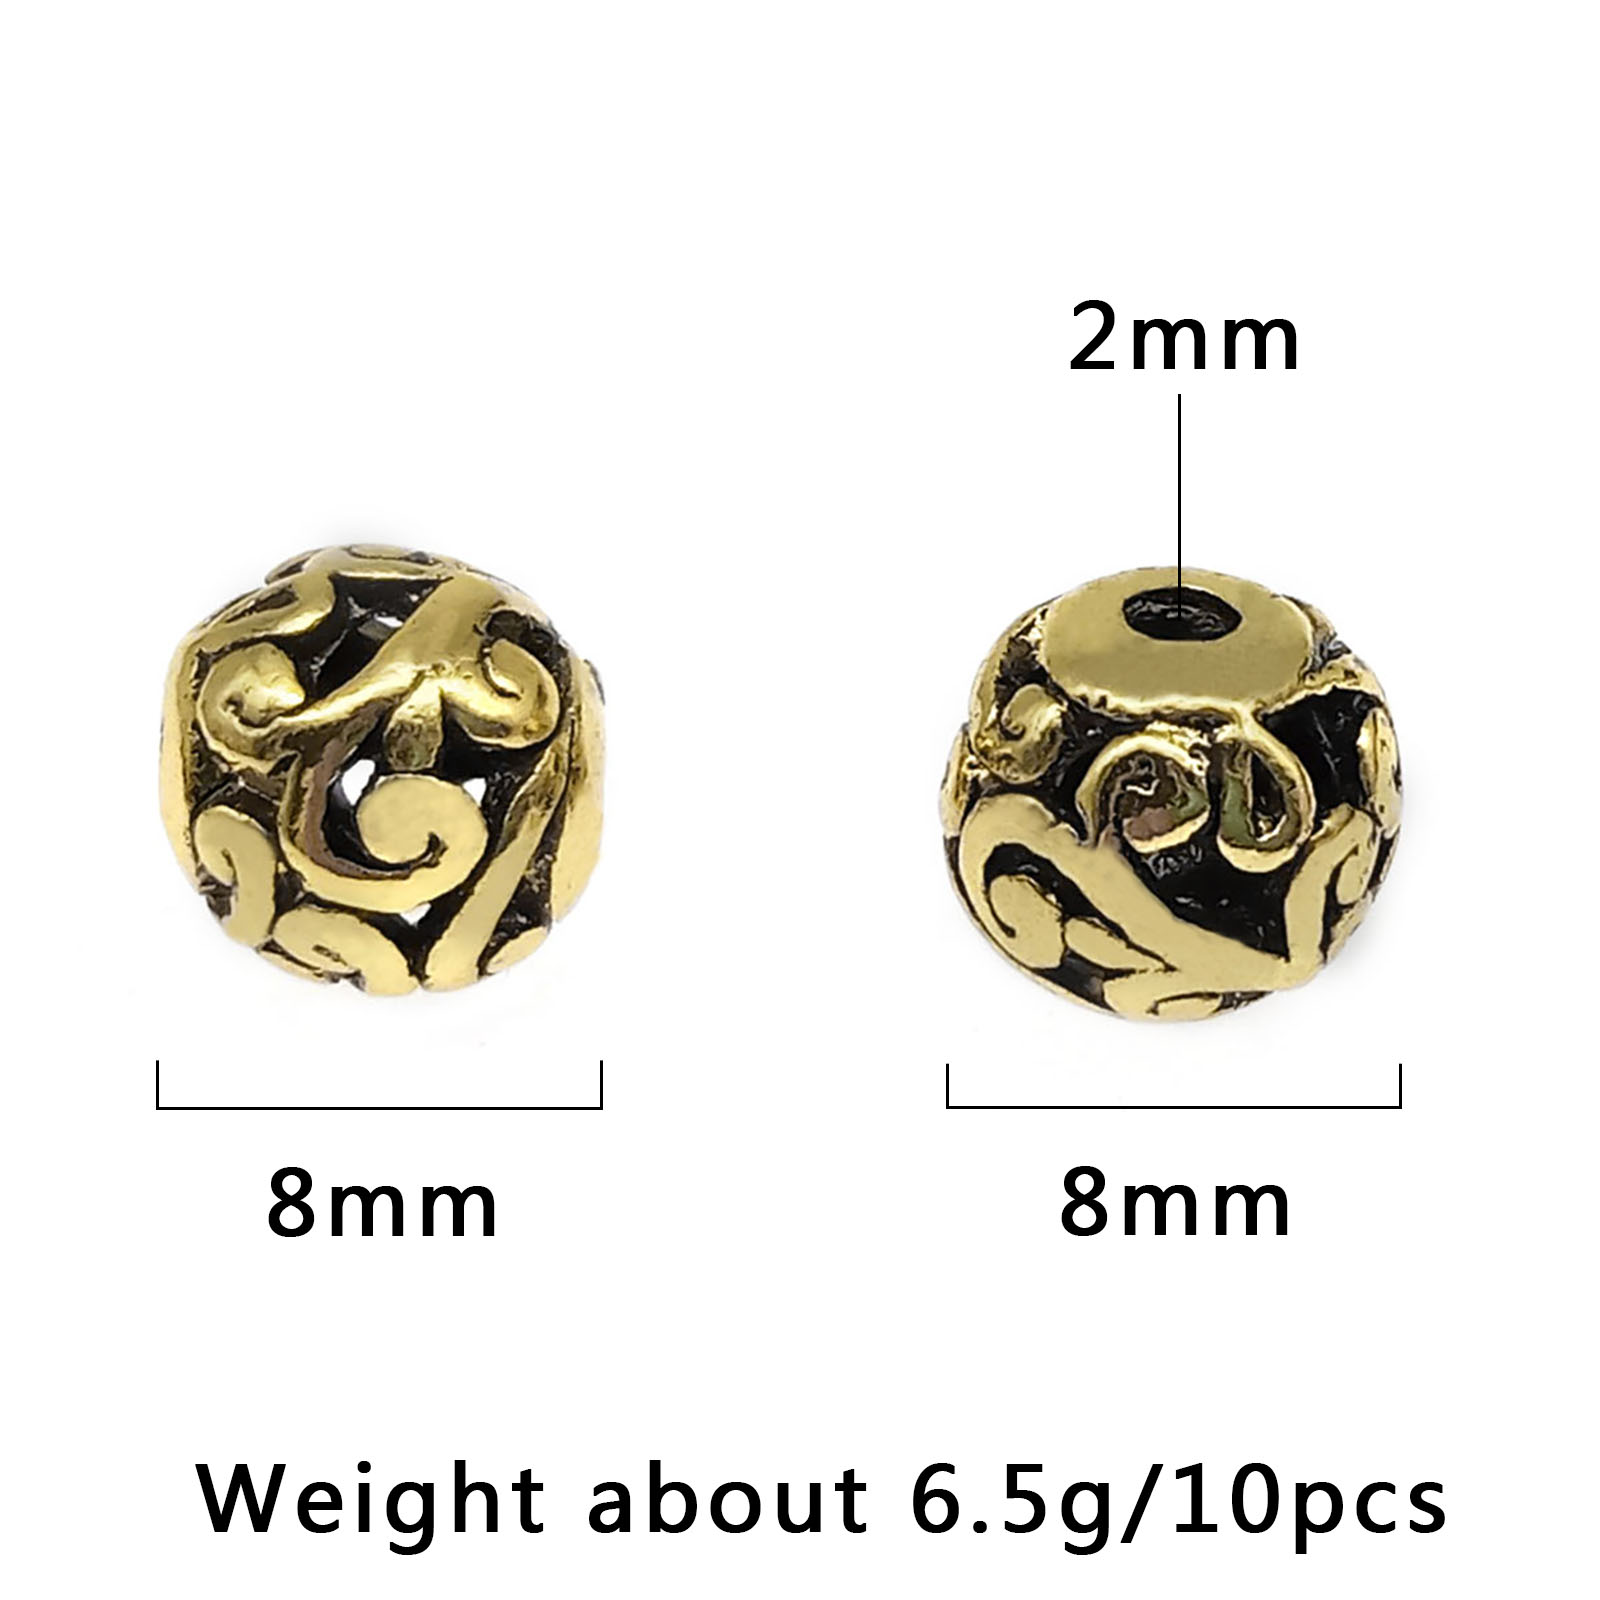 1:The diameter of the beads is 8mm and the hole diameter is about 2mm